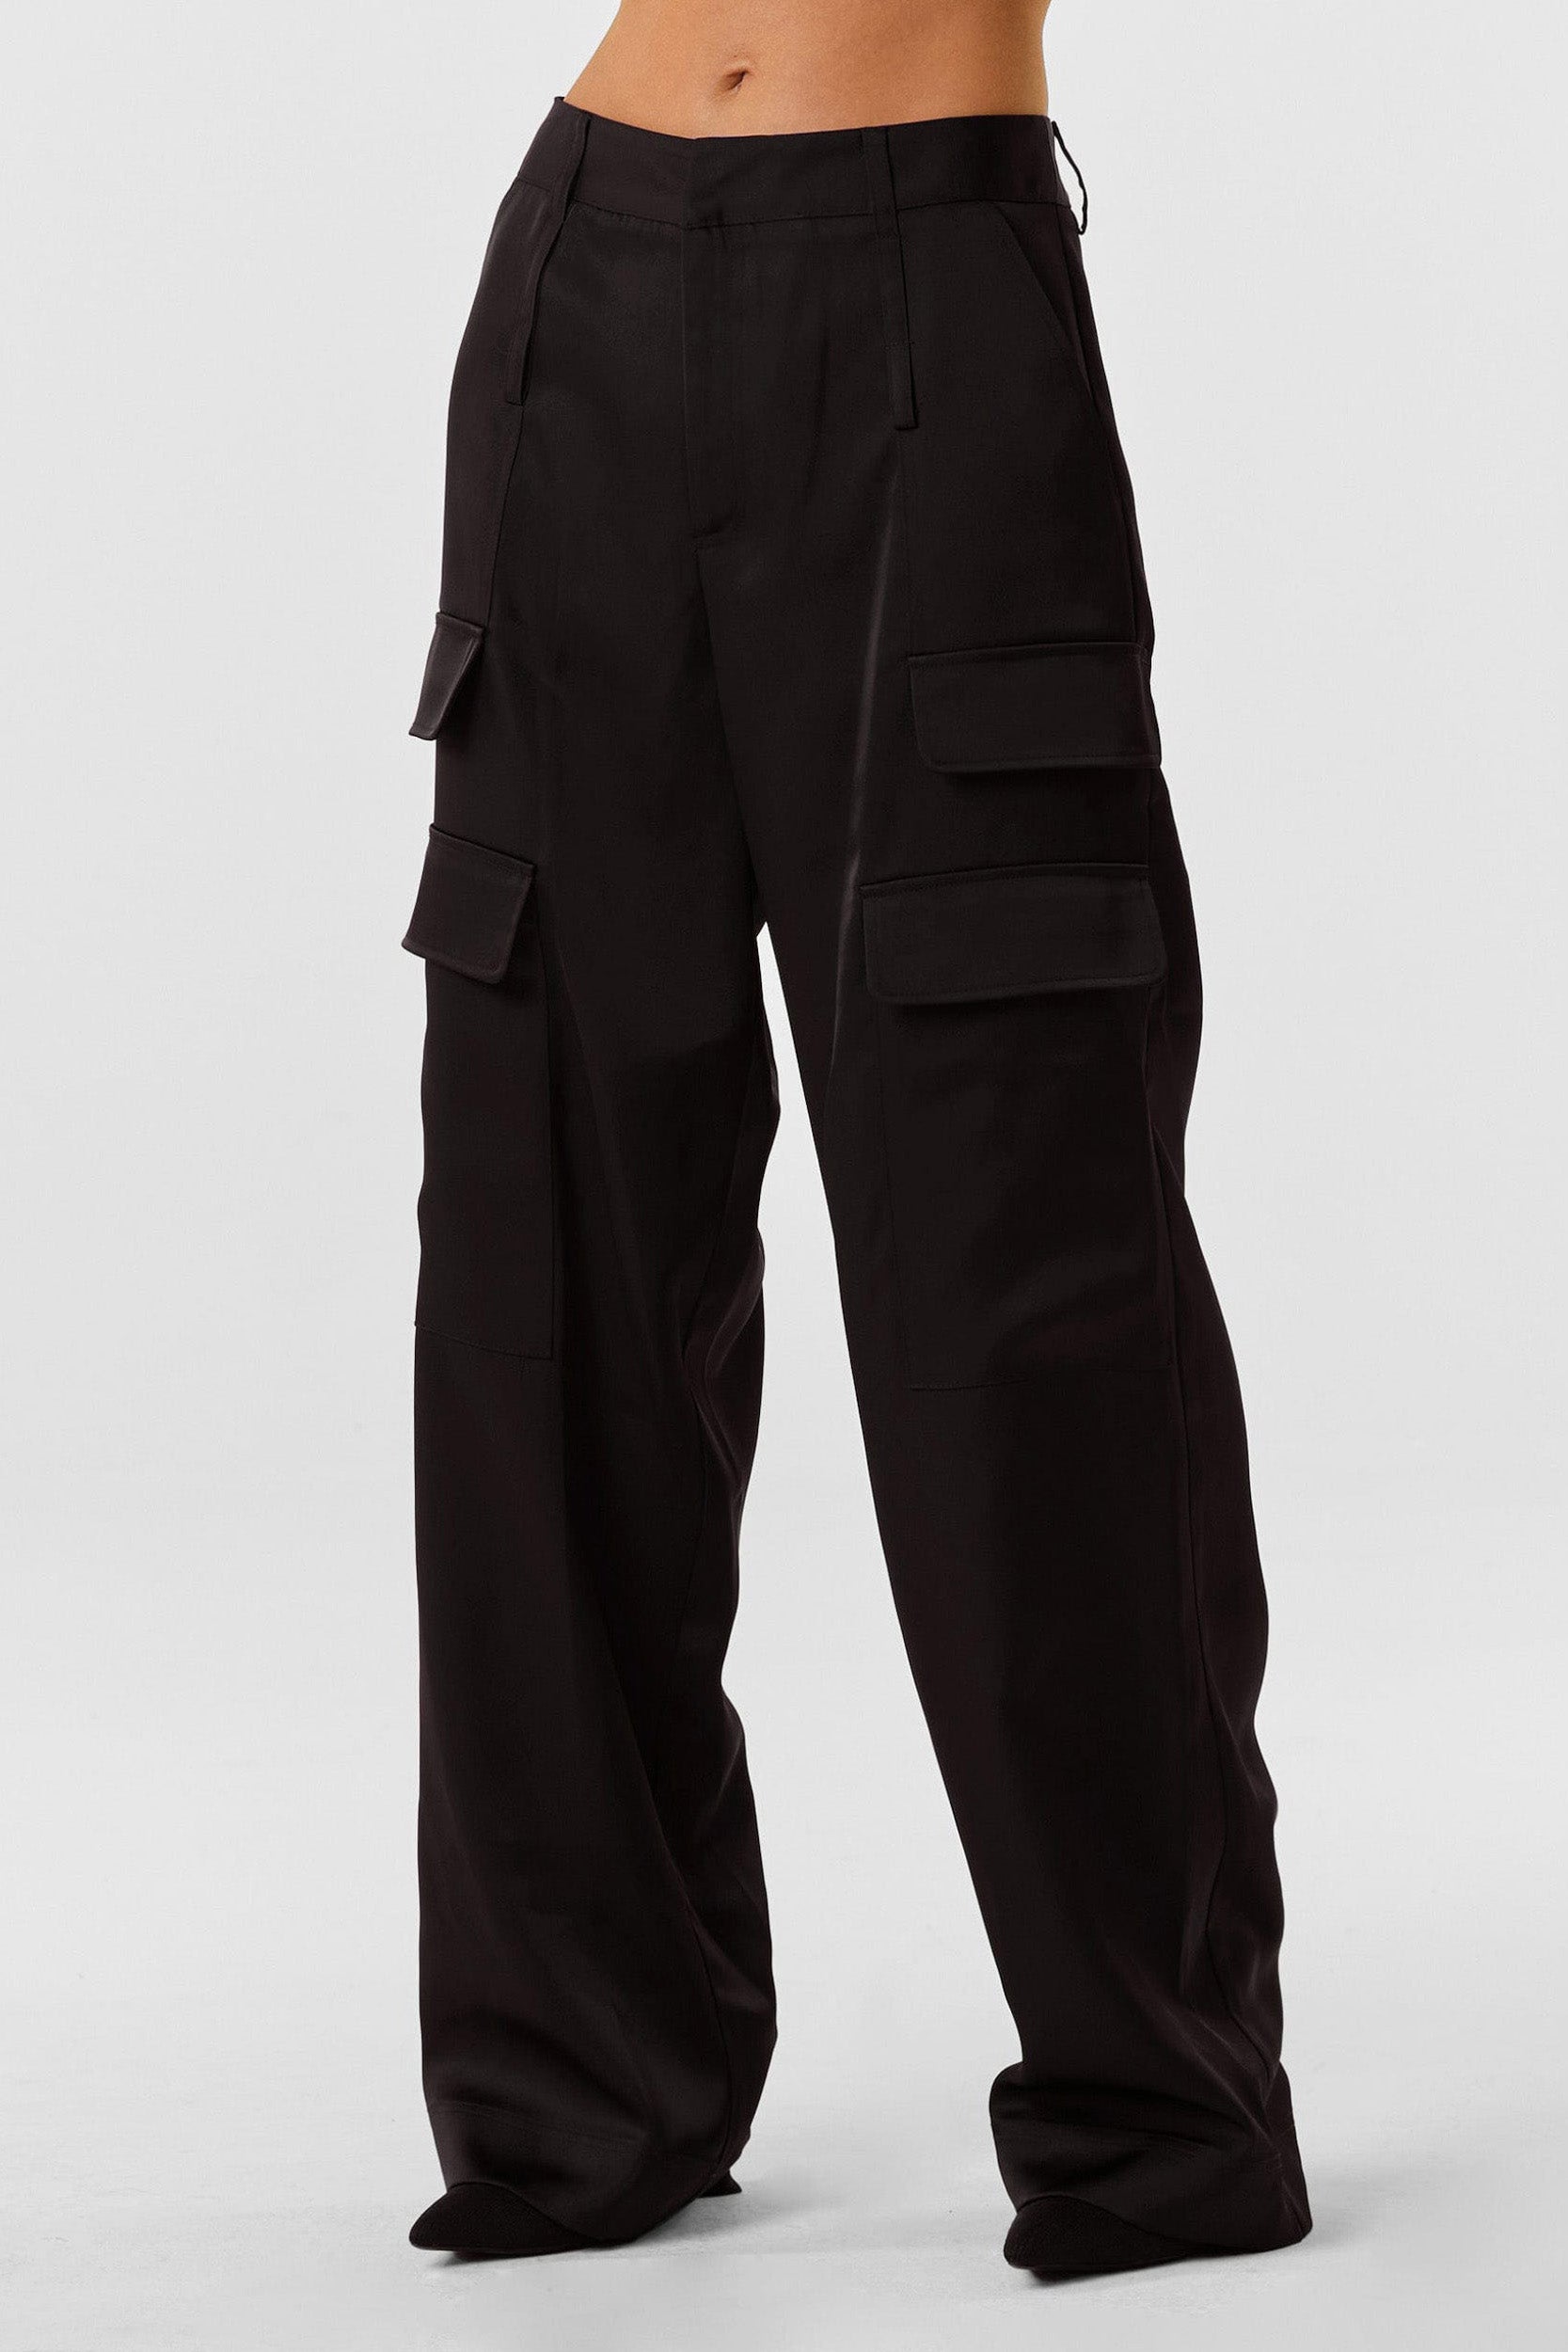 A person wearing the Milan Satin Cargo Pant - Black, featuring a high-waisted design and crafted from a satin-like fabric with multiple large pockets on the sides. The slightly loose-fitting pants extend down to cover the feet, and the plain white background emphasizes their unique mid-rise style.